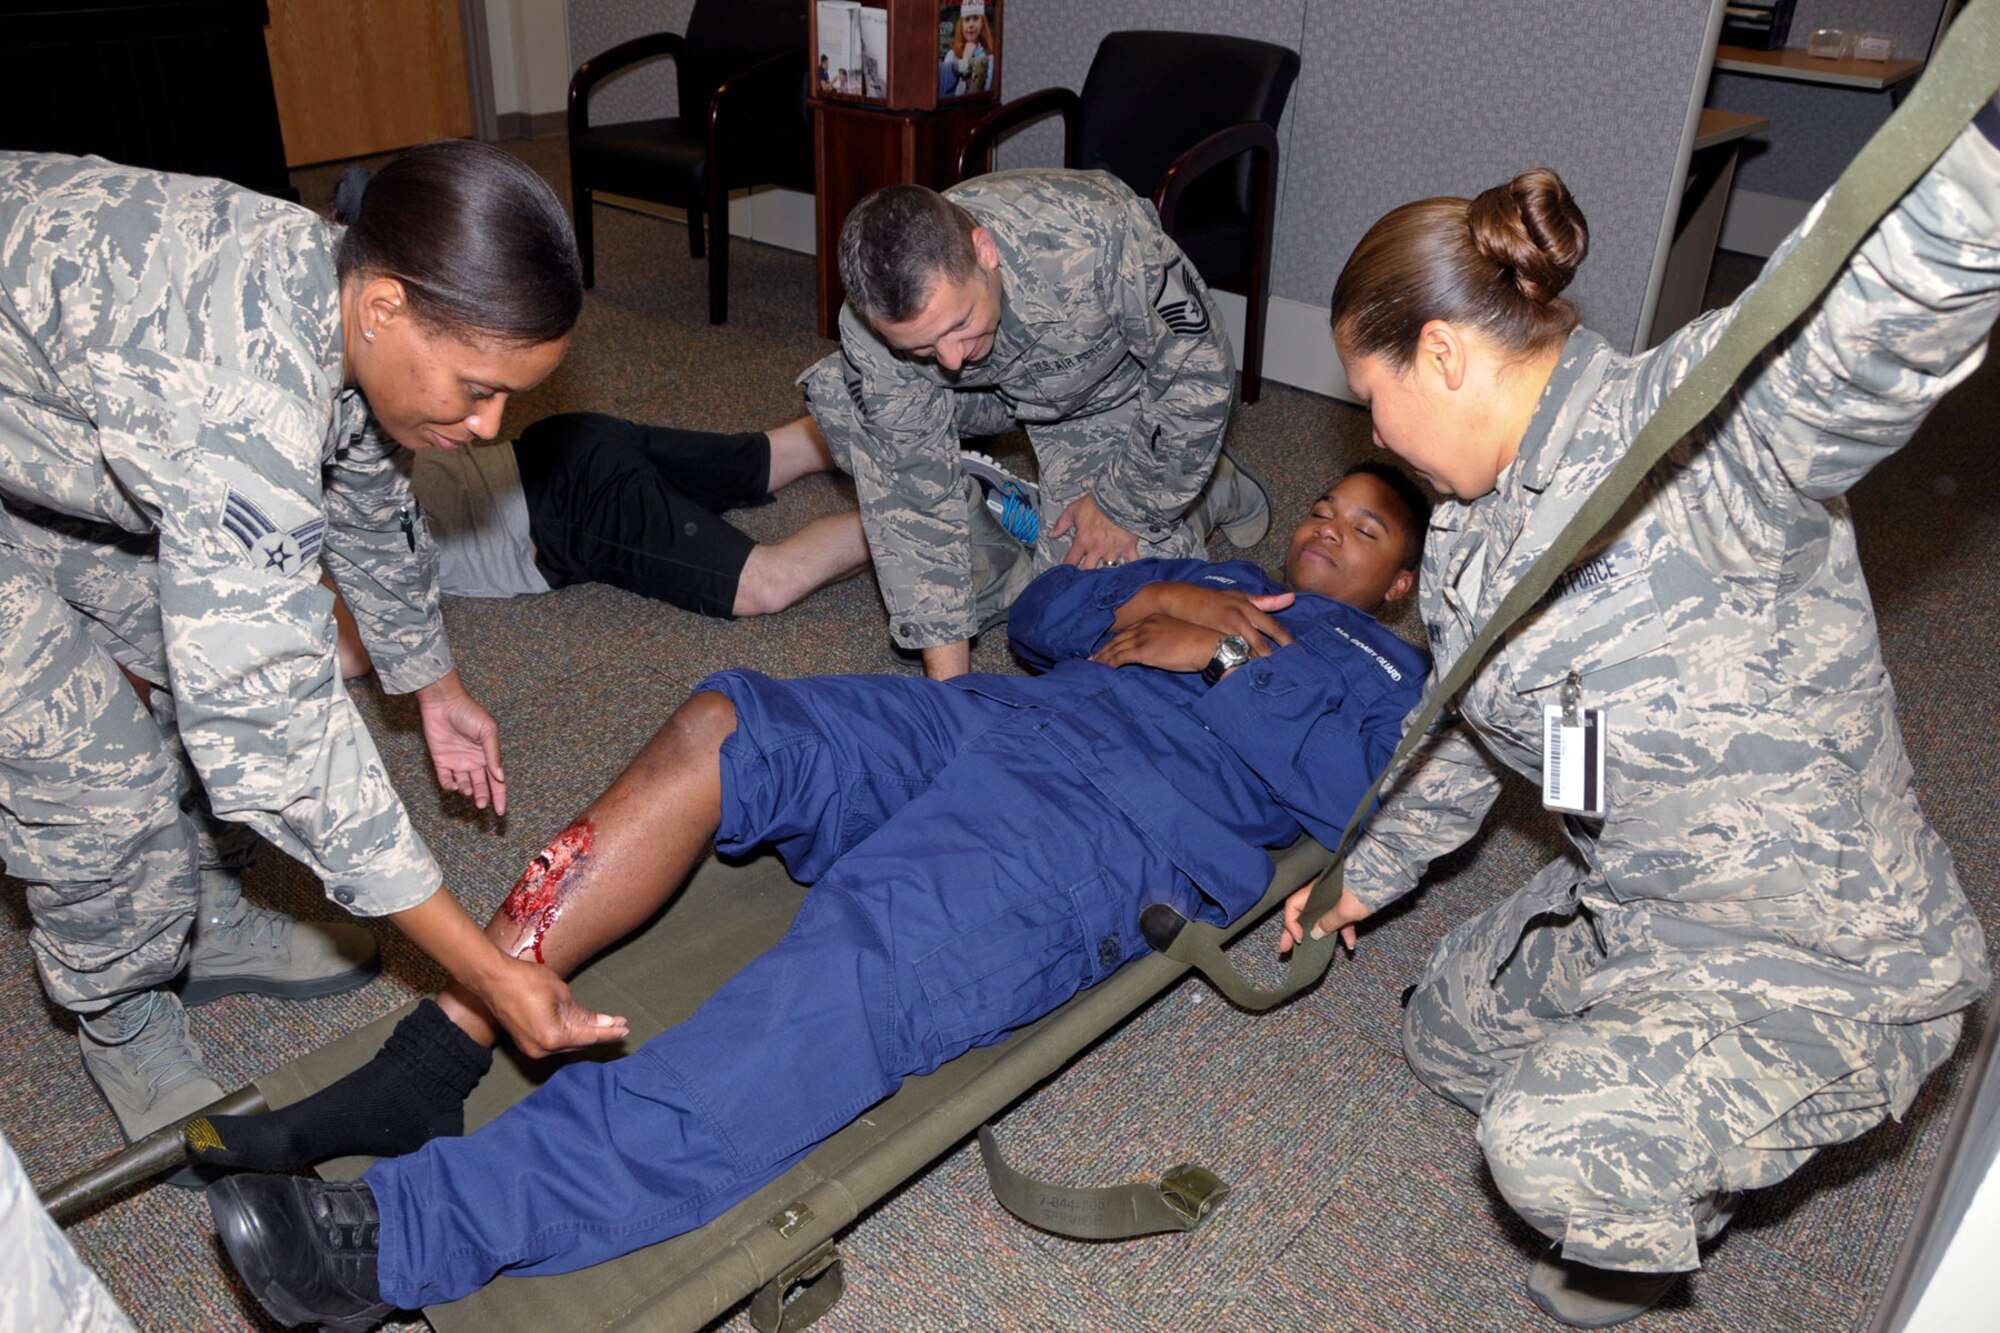 Medical, security and other personnel from the Michigan Air National Guard’s 127th Wing, Coast Guard Air Station Detroit and other organizations participate in a mass casualty and active shooter exercise Friday, Aug. 7, 2015, at Selfridge Air National Guard Base, Mich. (U.S. Air National Guard photo by Brittani Baisden/Released)